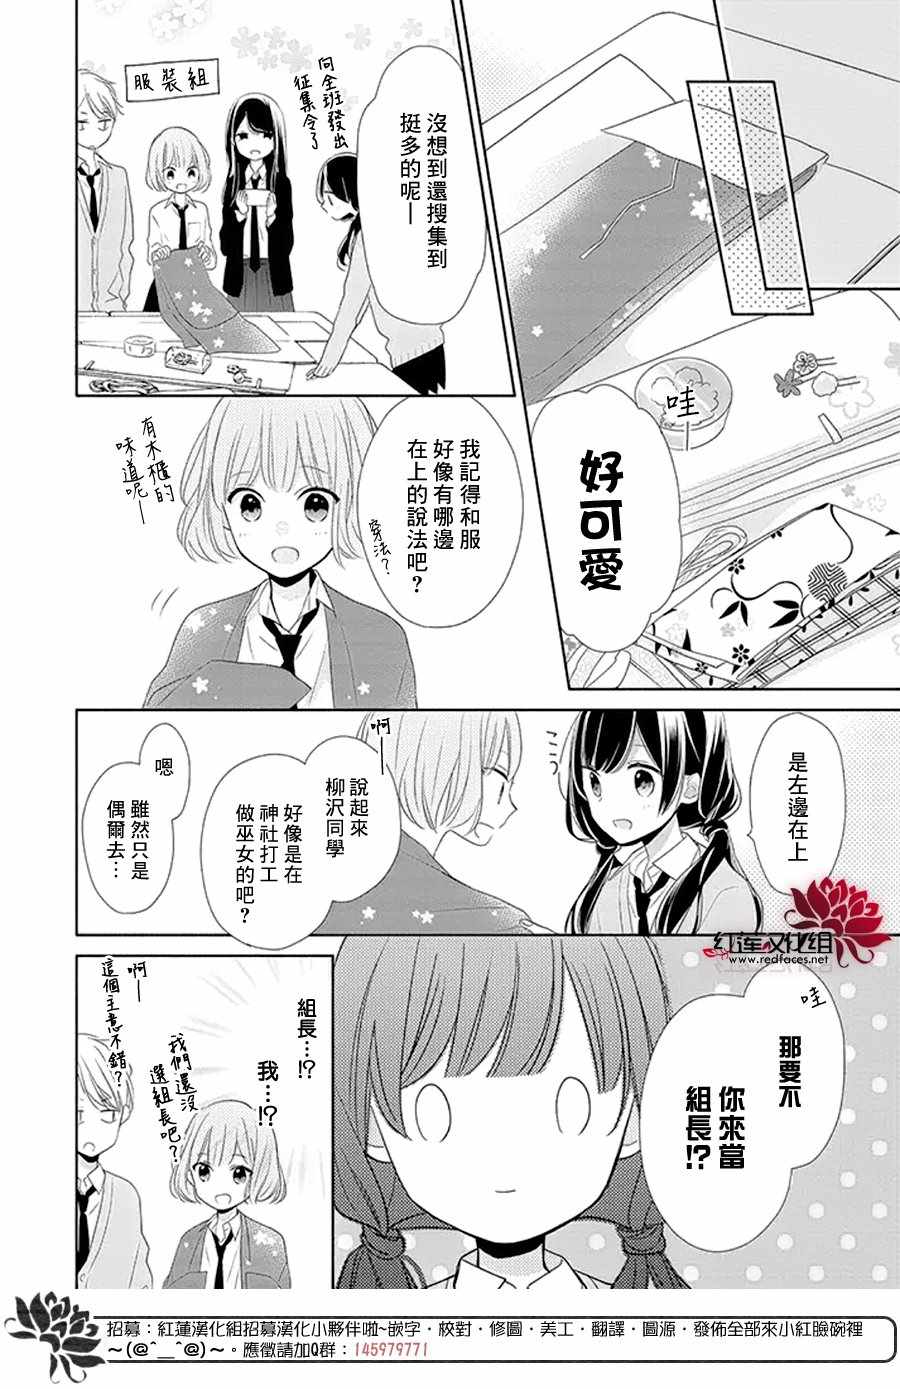 《If given a second chance》漫画 second chance 016话